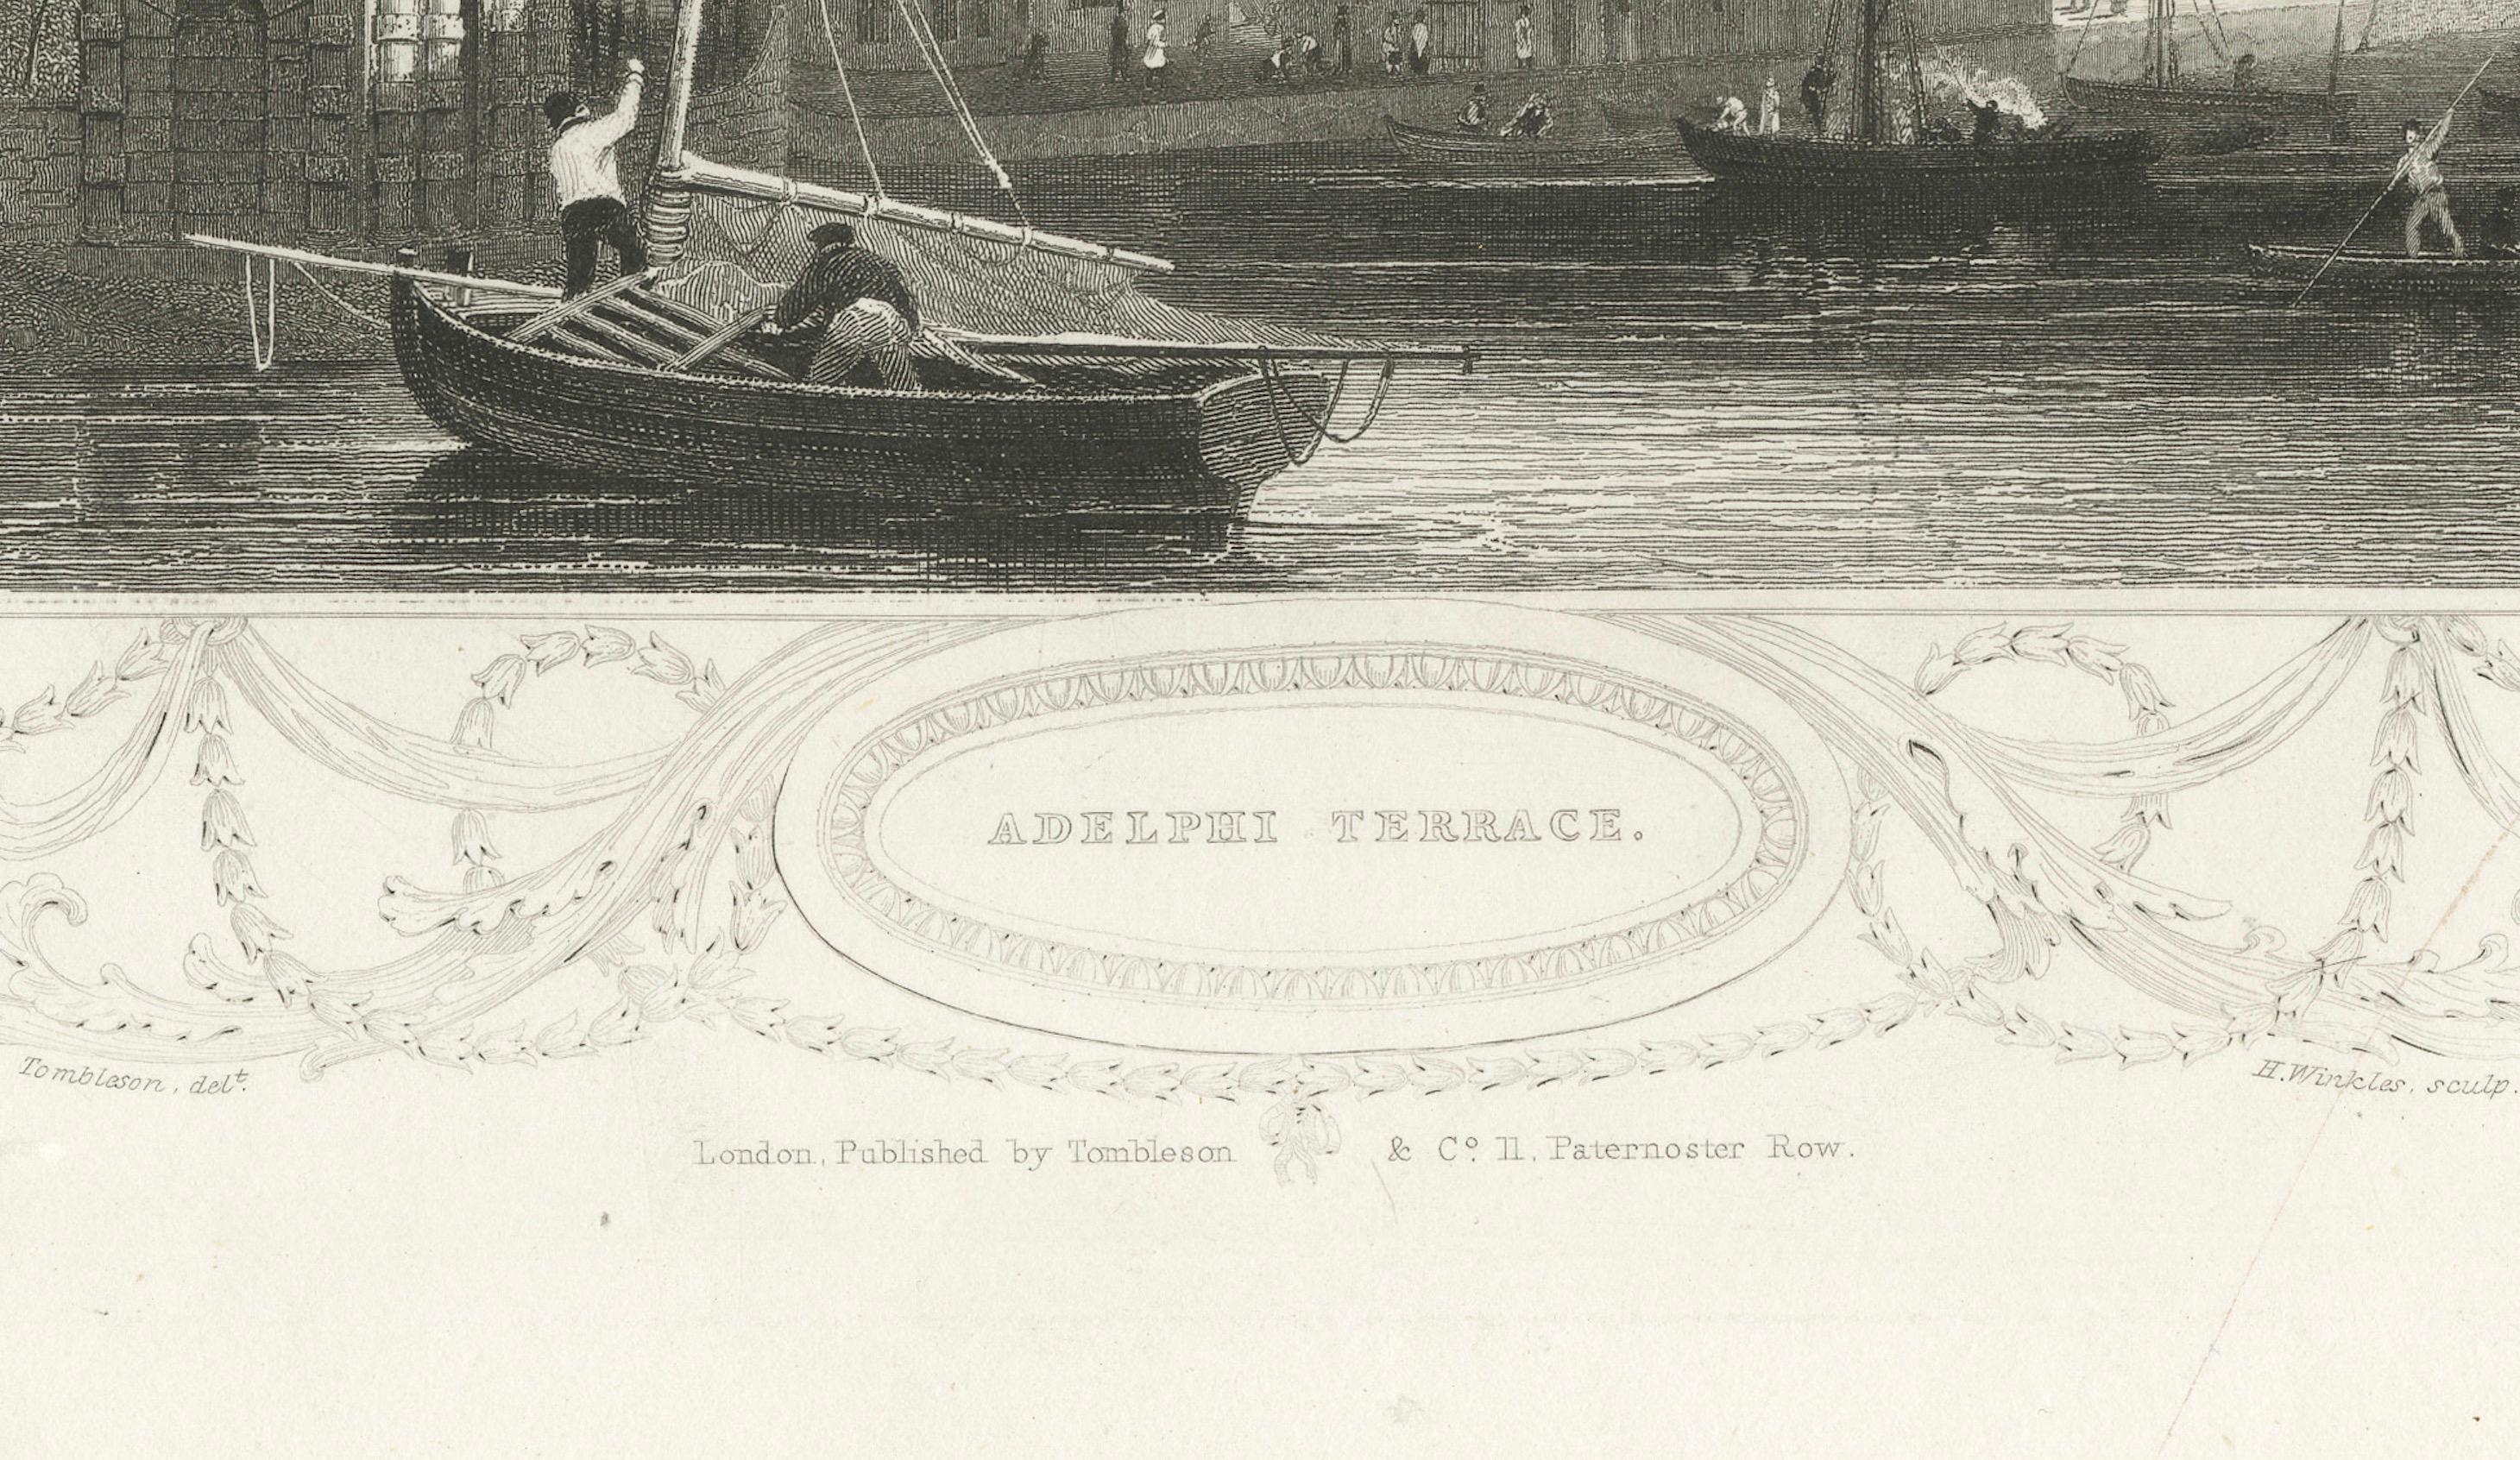 Engraved Steel Engraving of Adelphi Terrace on the Thames, London, 1835 For Sale